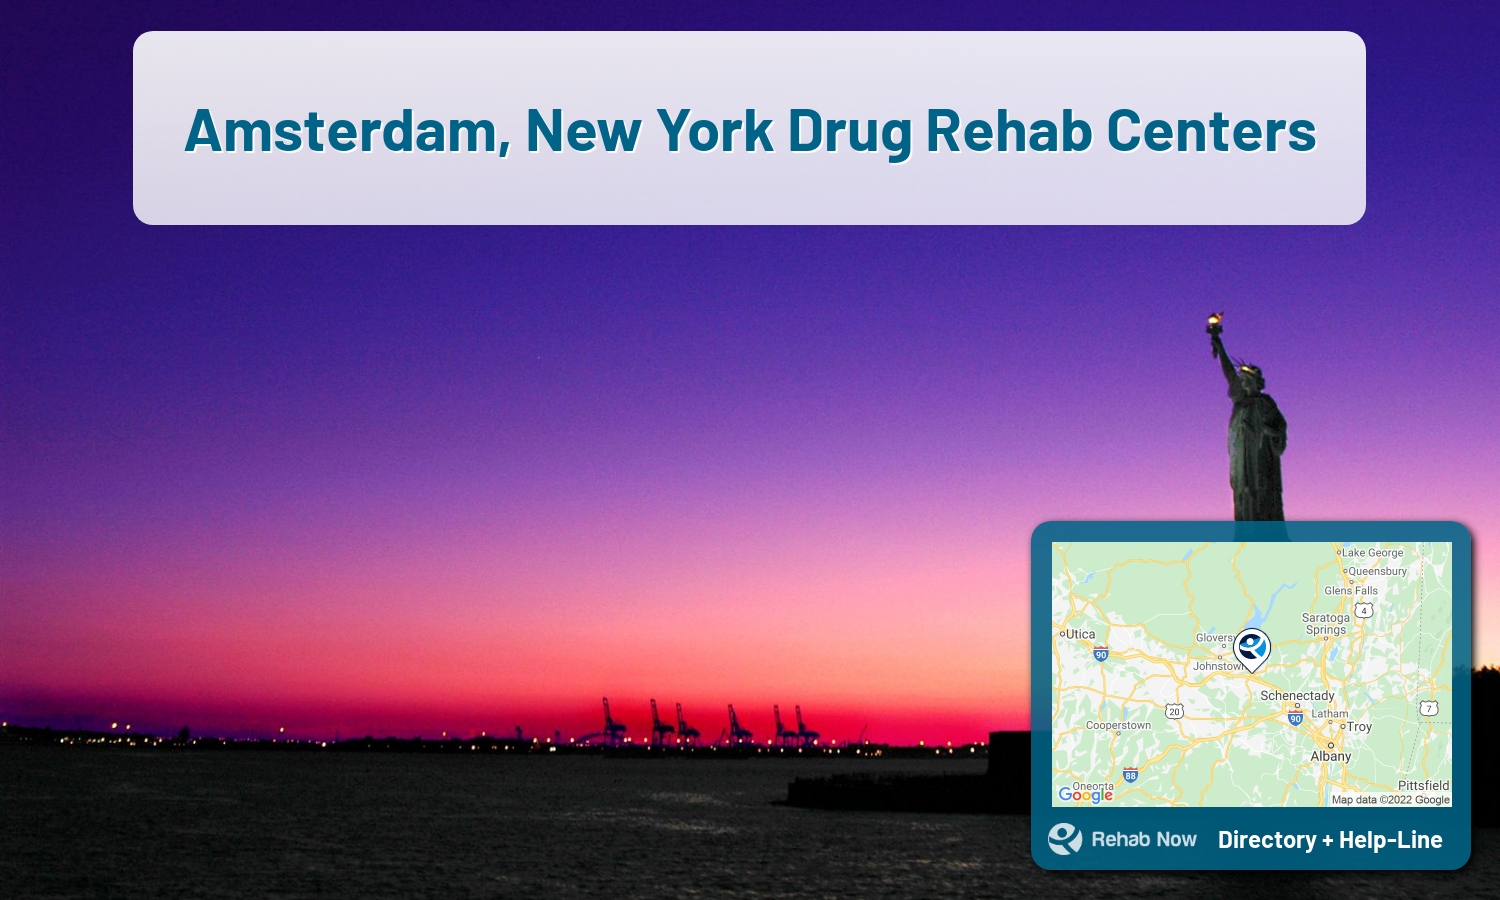 Amsterdam, NY Treatment Centers. Find drug rehab in Amsterdam, New York, or detox and treatment programs. Get the right help now!